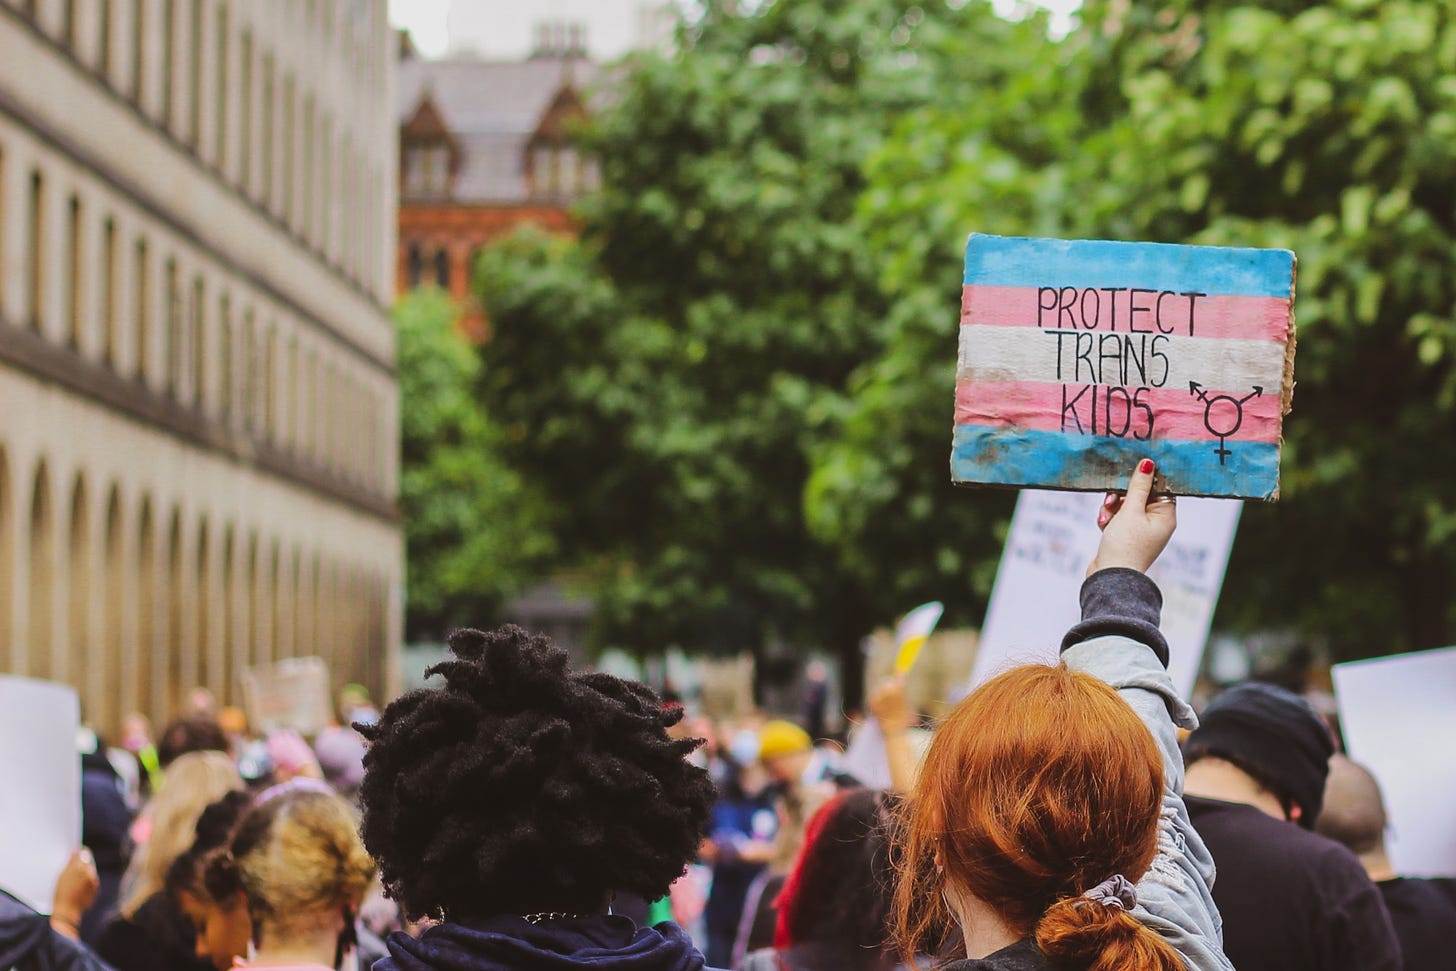 A sign at a protest is held up that says "Protect Trans Kids"